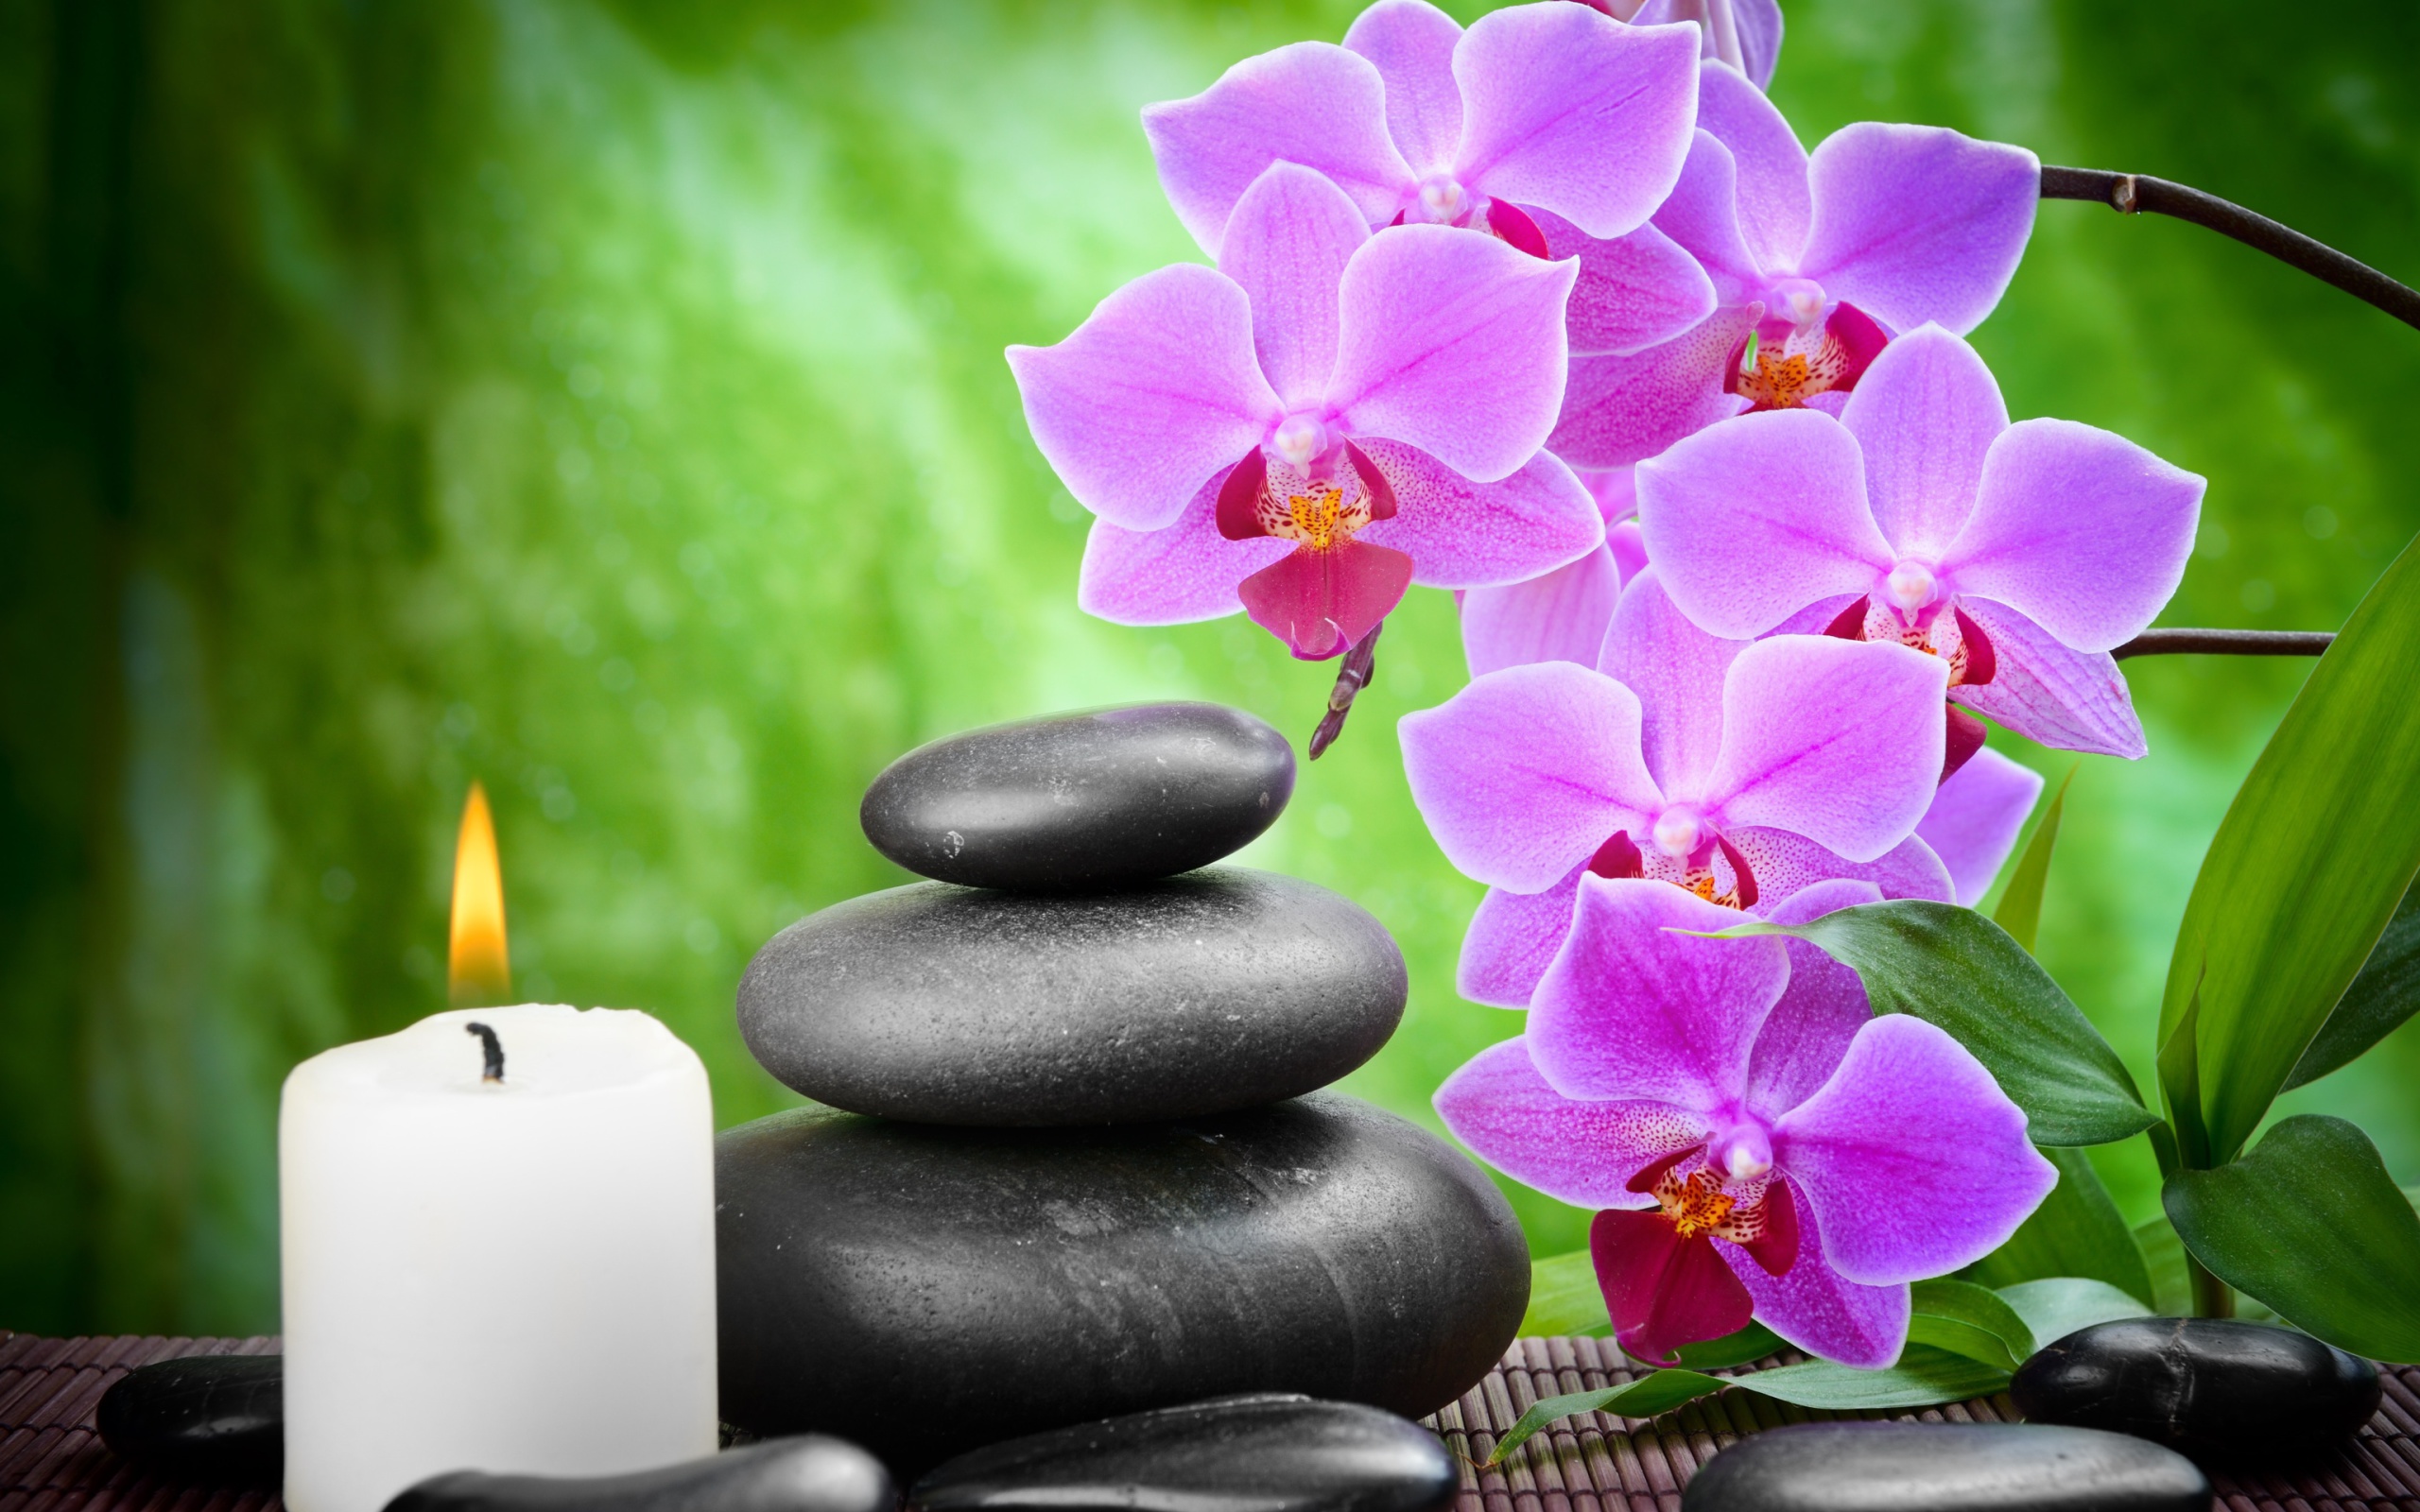 Pebbles, candles and orchids screenshot #1 2560x1600